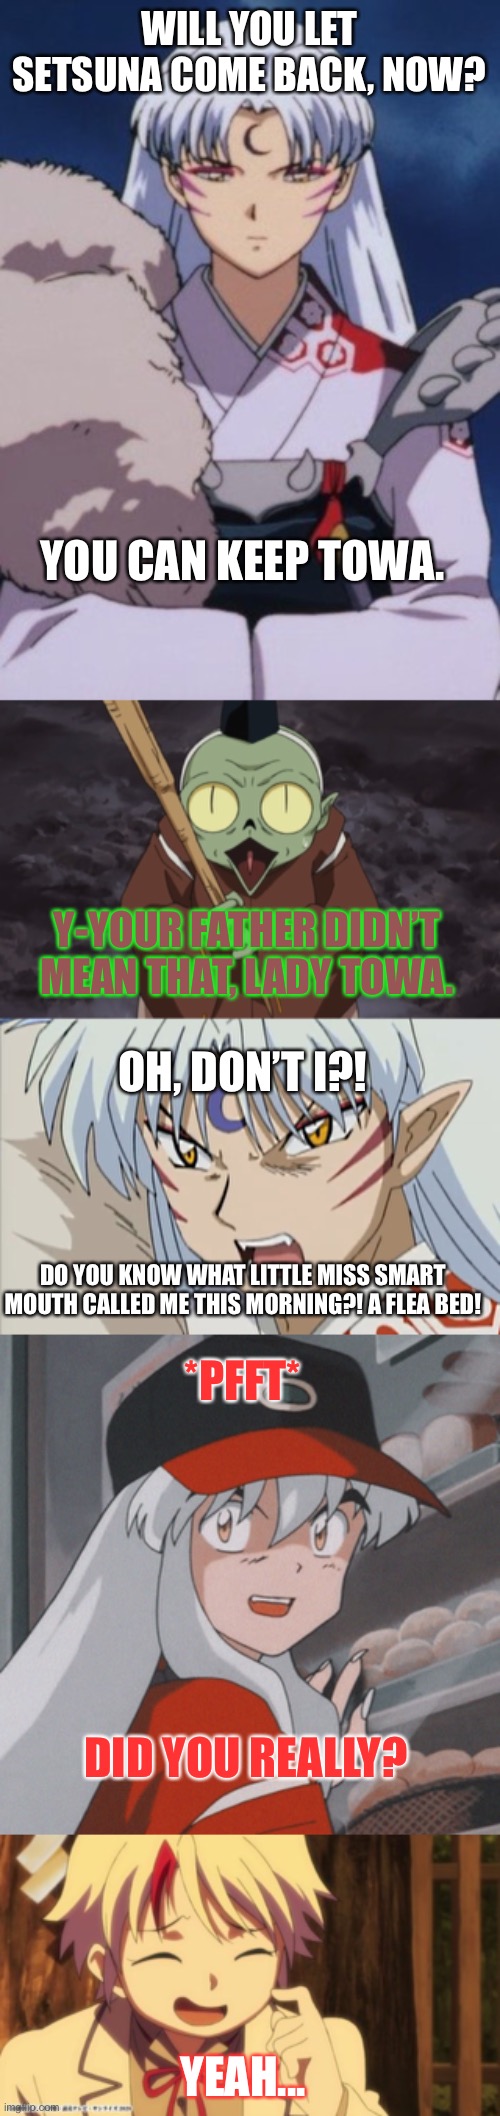 Uncle Inuyasha | WILL YOU LET SETSUNA COME BACK, NOW? YOU CAN KEEP TOWA. Y-YOUR FATHER DIDN’T MEAN THAT, LADY TOWA. OH, DON’T I?! DO YOU KNOW WHAT LITTLE MISS SMART MOUTH CALLED ME THIS MORNING?! A FLEA BED! *PFFT*; DID YOU REALLY? YEAH... | image tagged in inuyasha,yashahime,venture bros,sesshomaru,jaken,parody | made w/ Imgflip meme maker